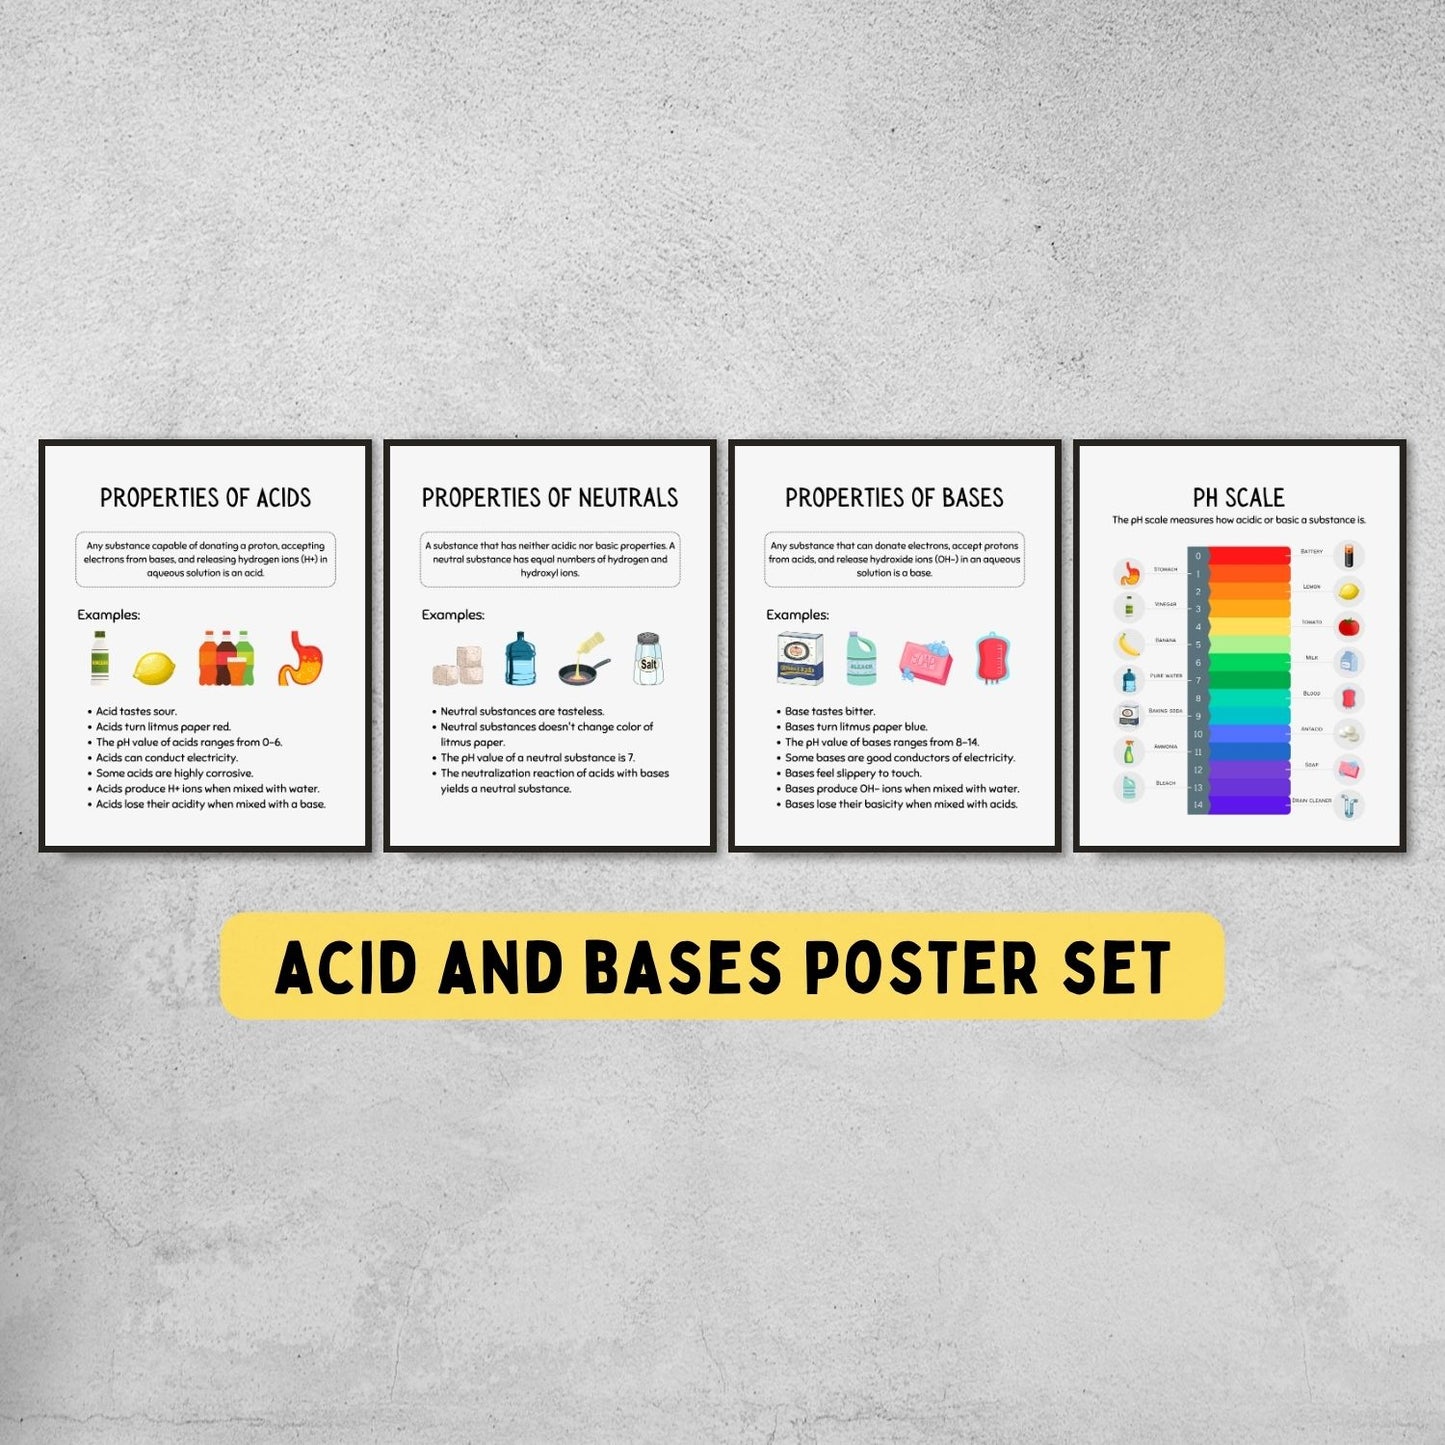 Acids and bases poster set for science class decoration